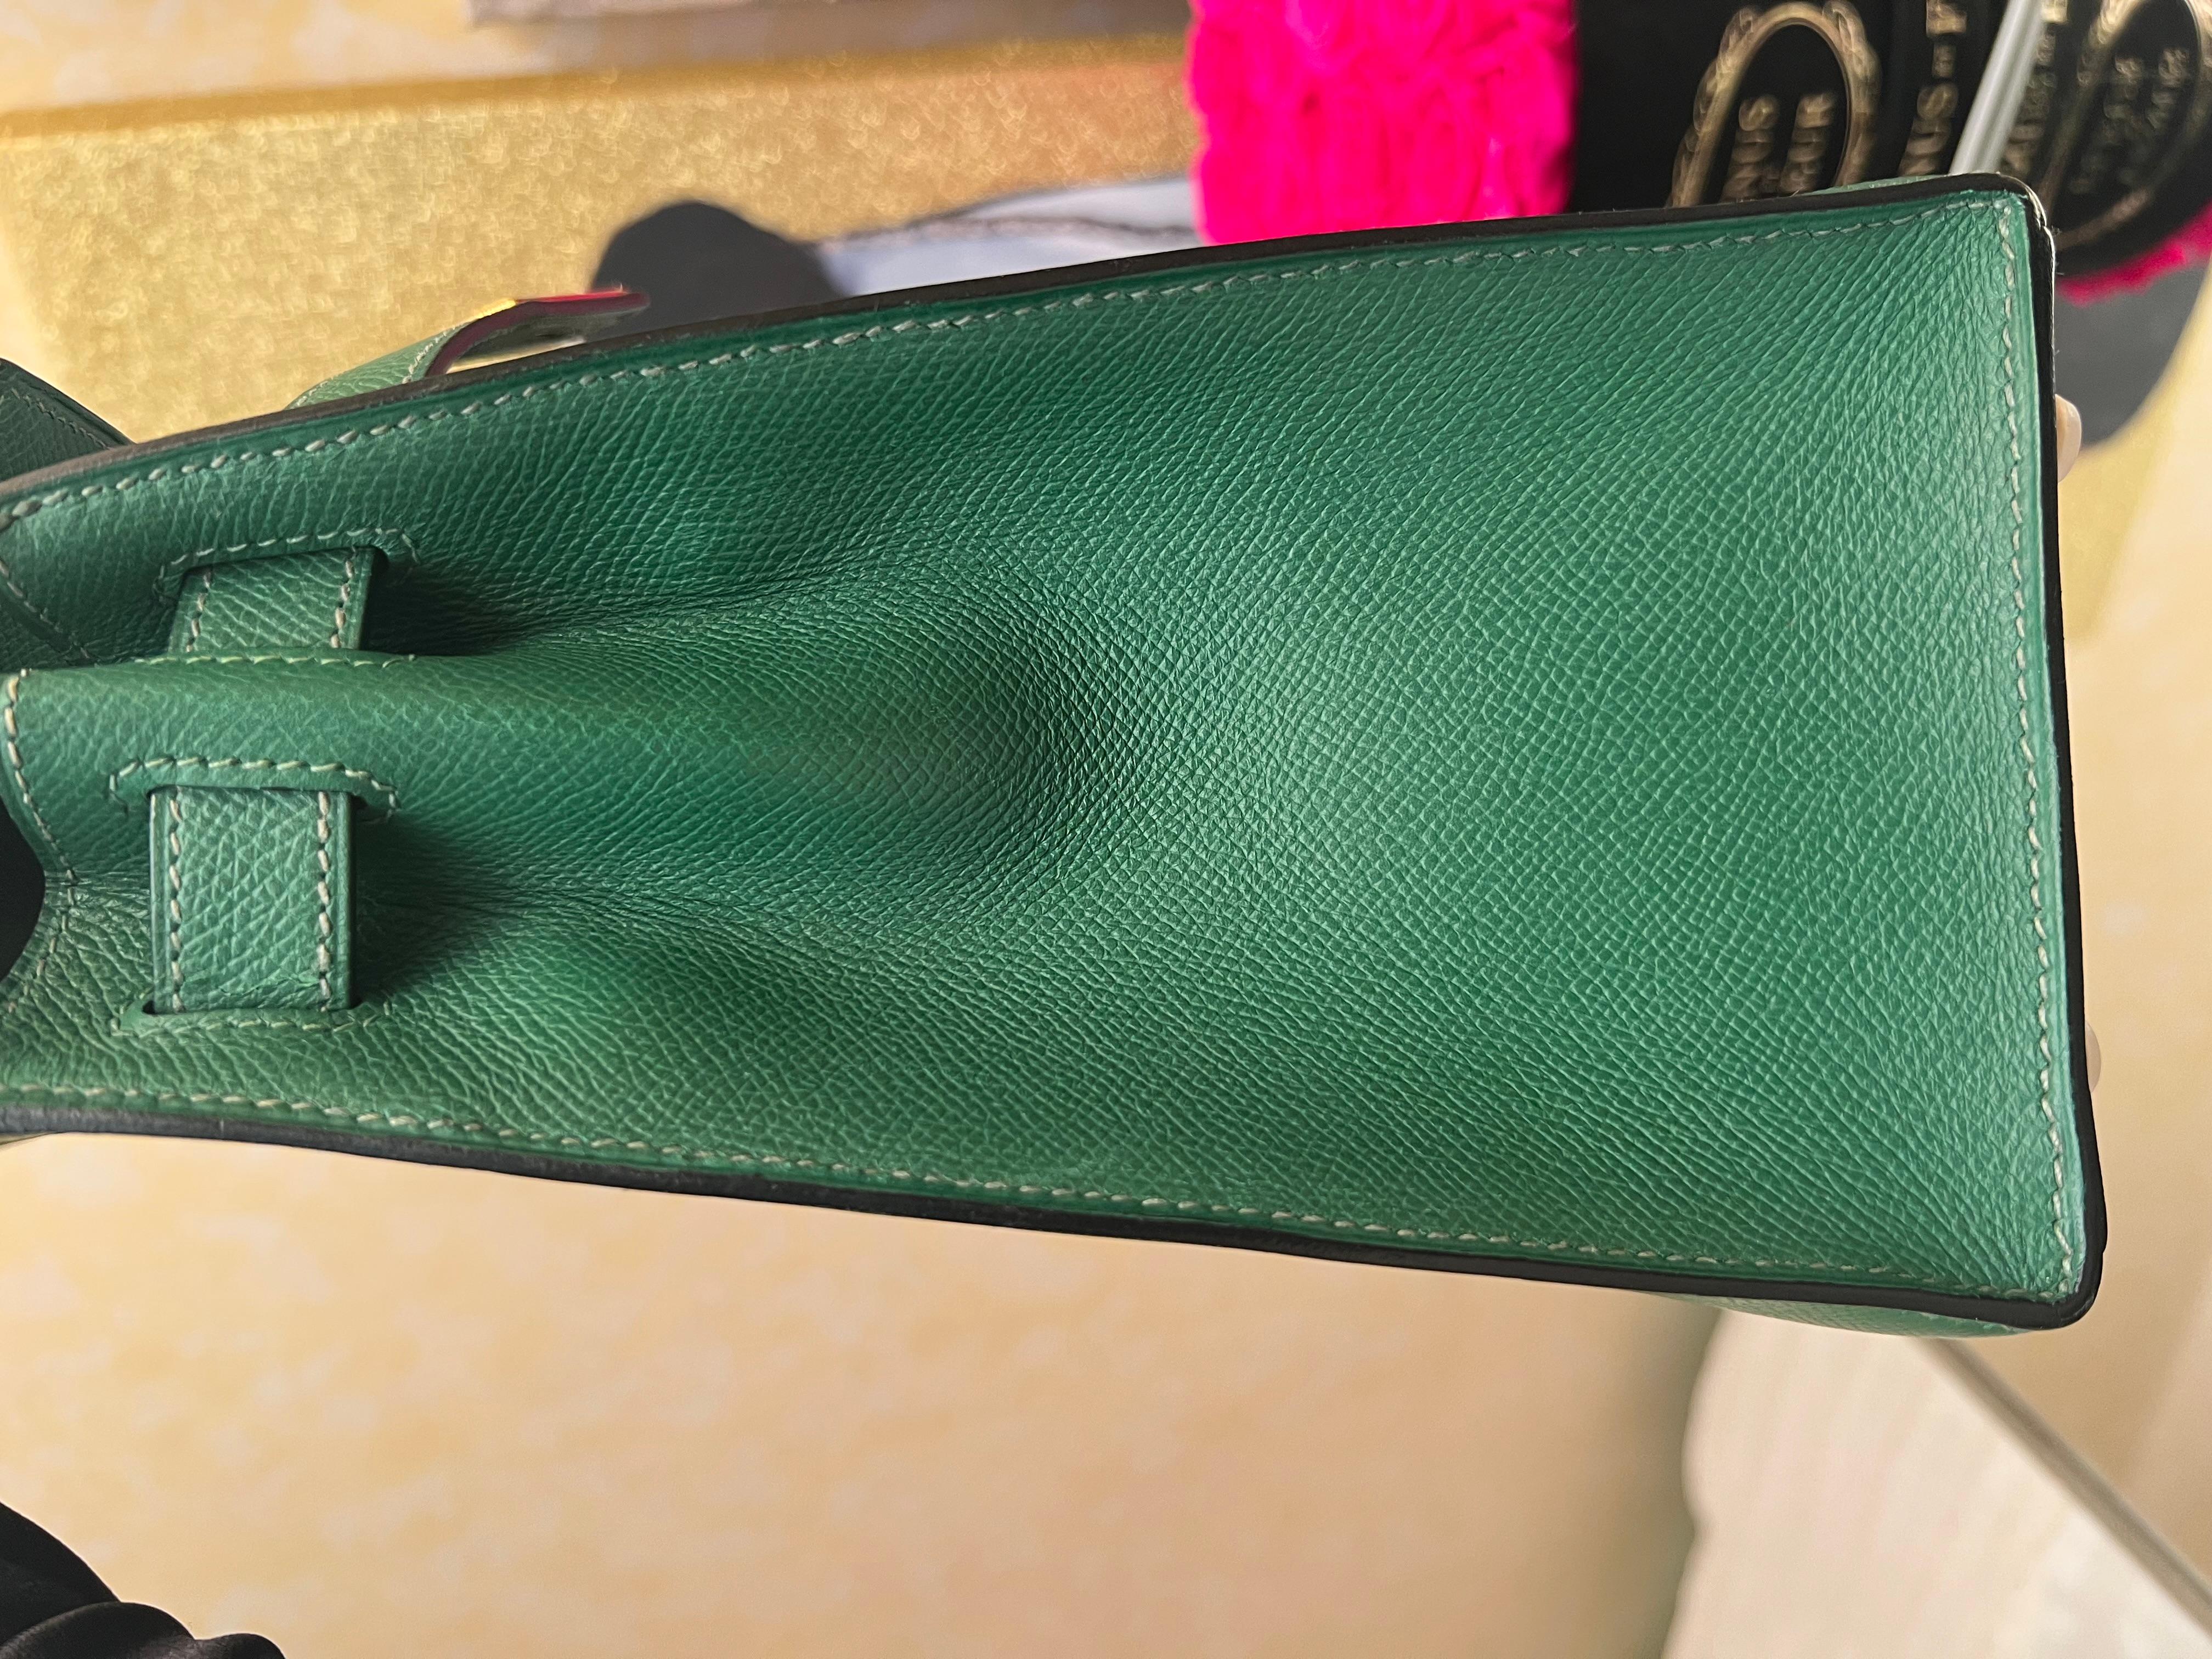 Hermes Kelly 28 Cactus Sellier Bag with GHW in Epsom leather  For Sale 10